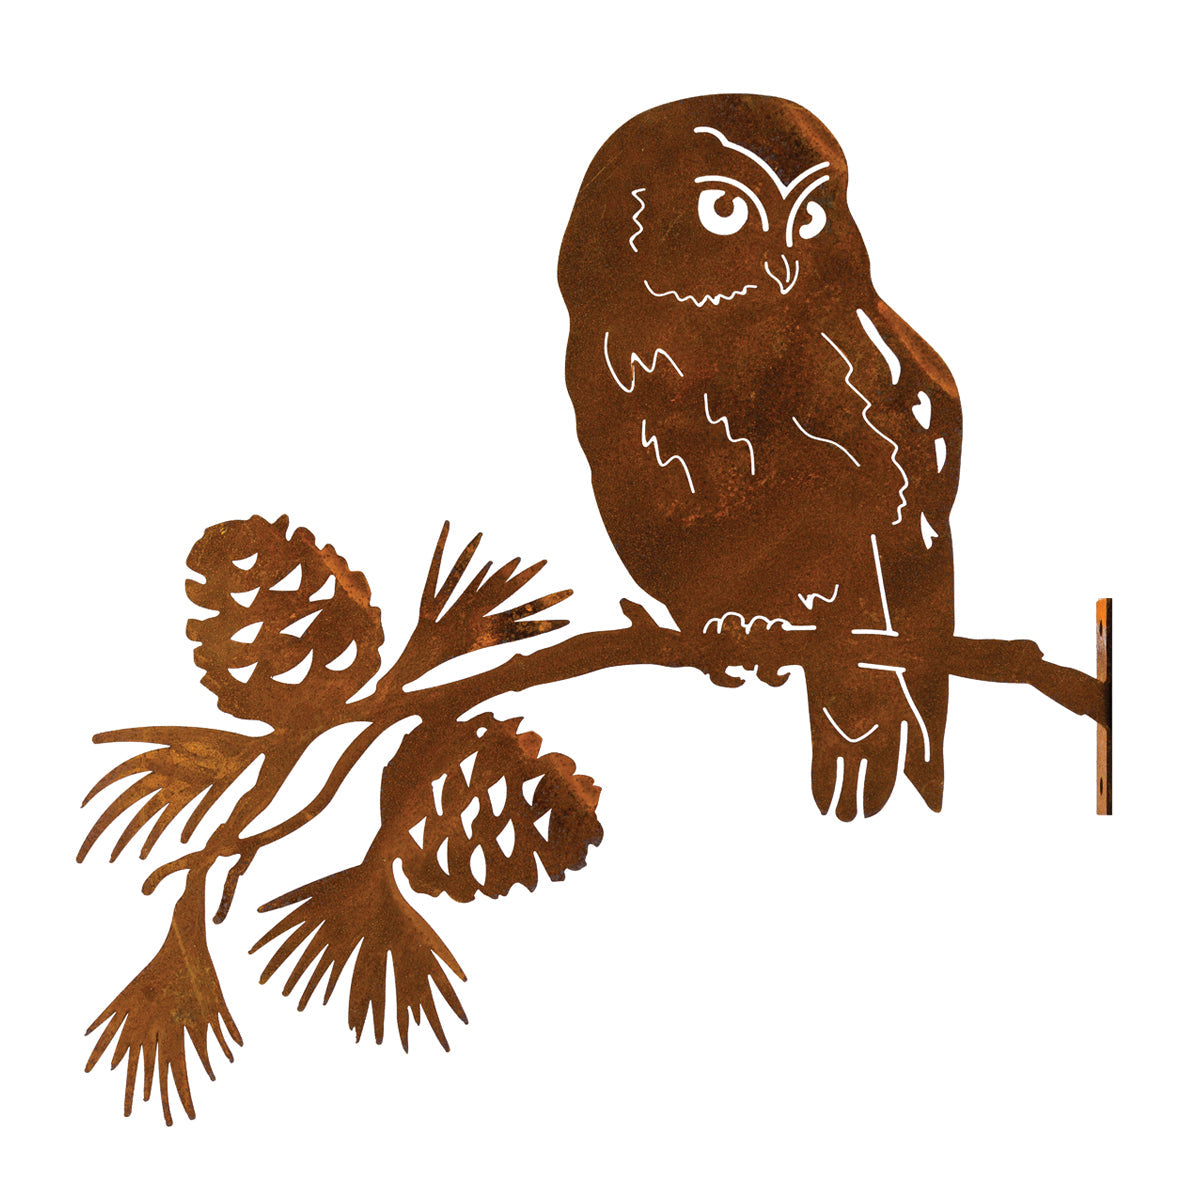 owl on a branch silhouette